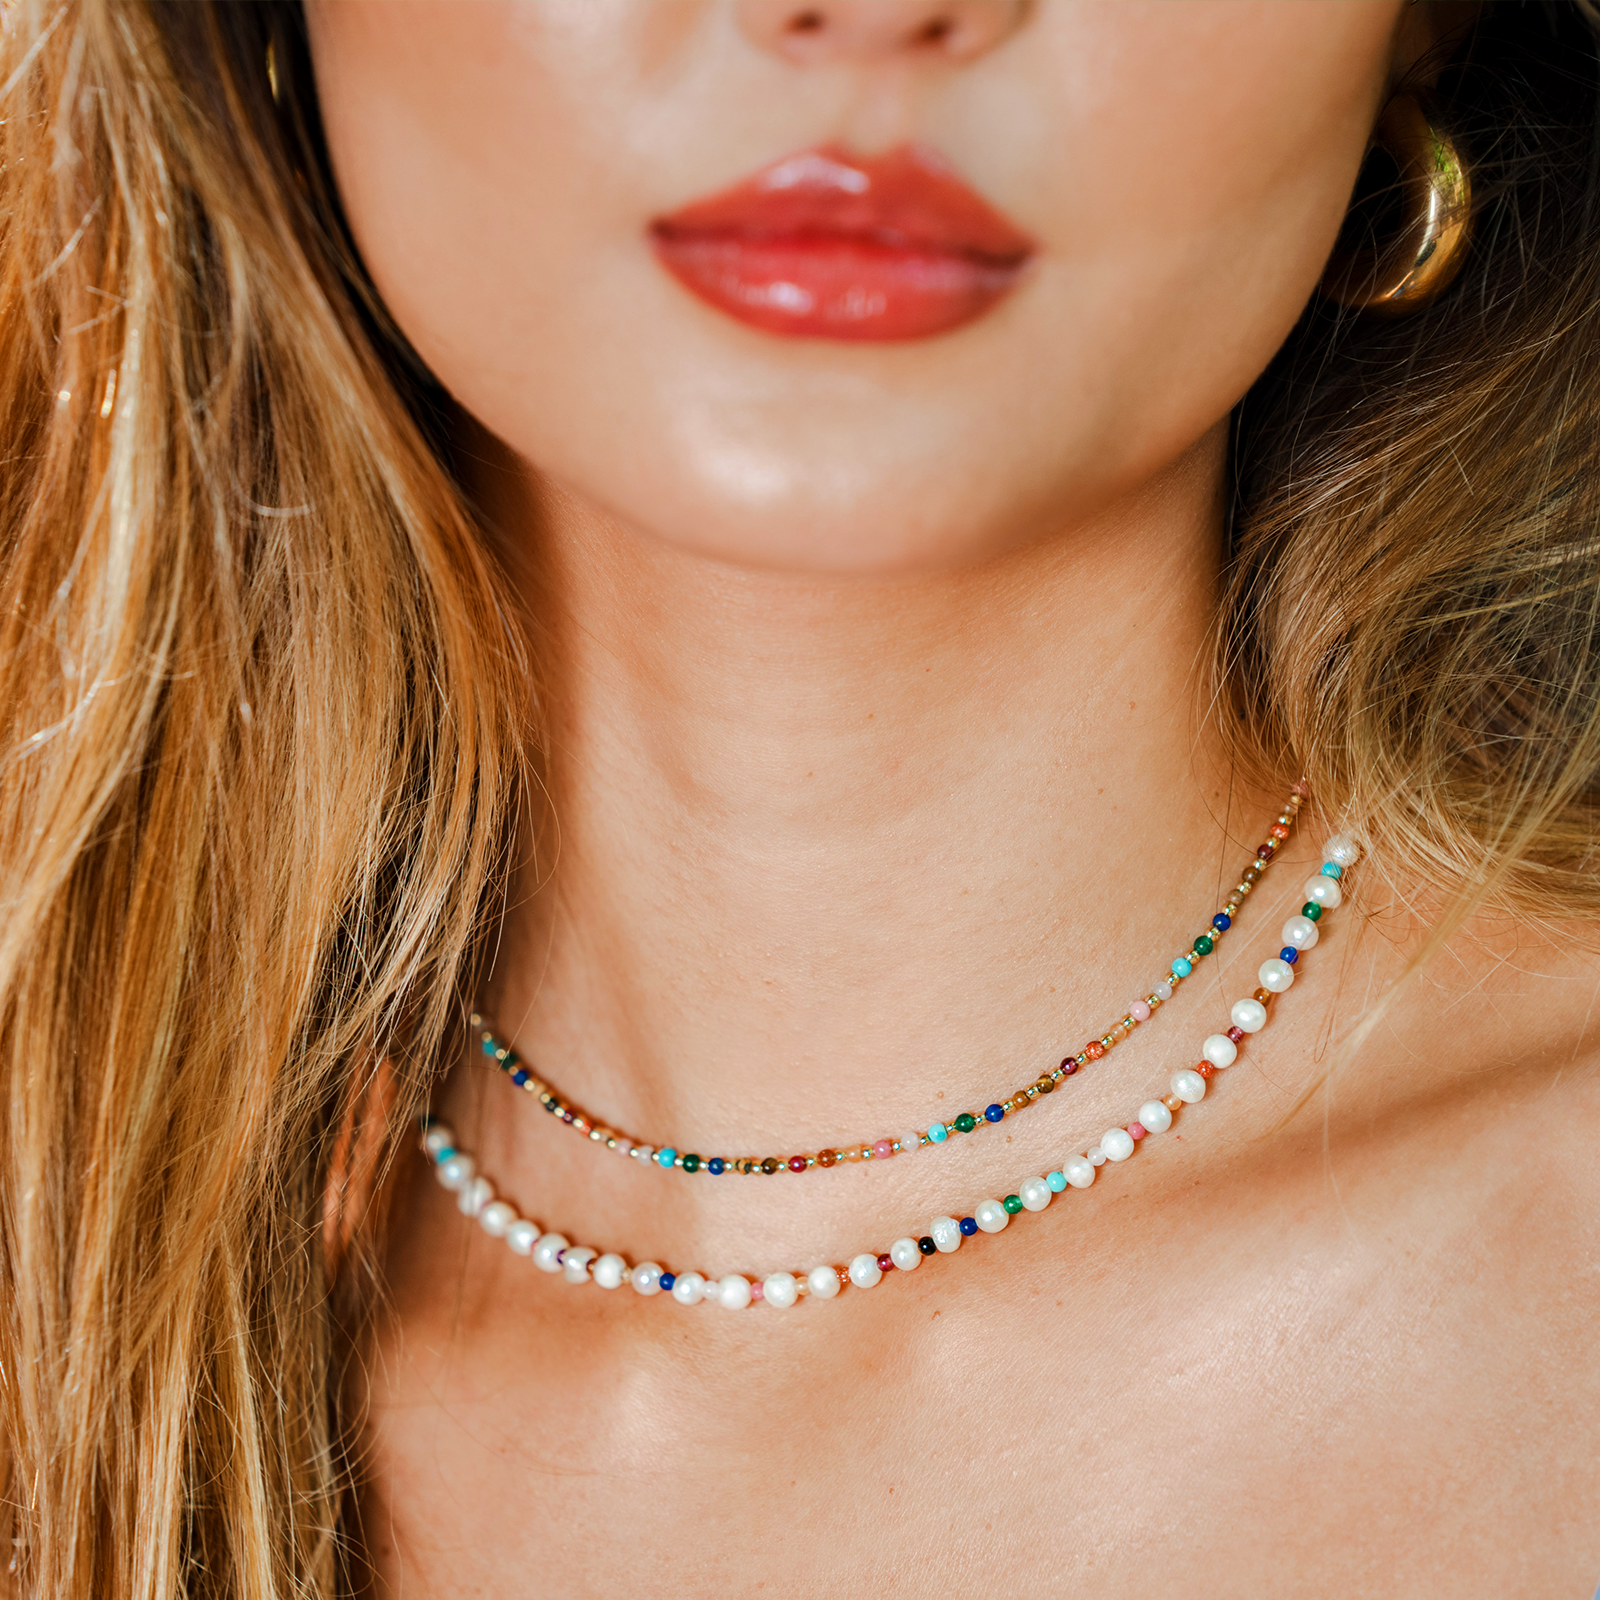 Model wearing a stack of two healing necklaces. The necklaces include a pearl and 2mm multicolor stone healing necklace and a 2mm multicolor stone and gold bead healing necklace